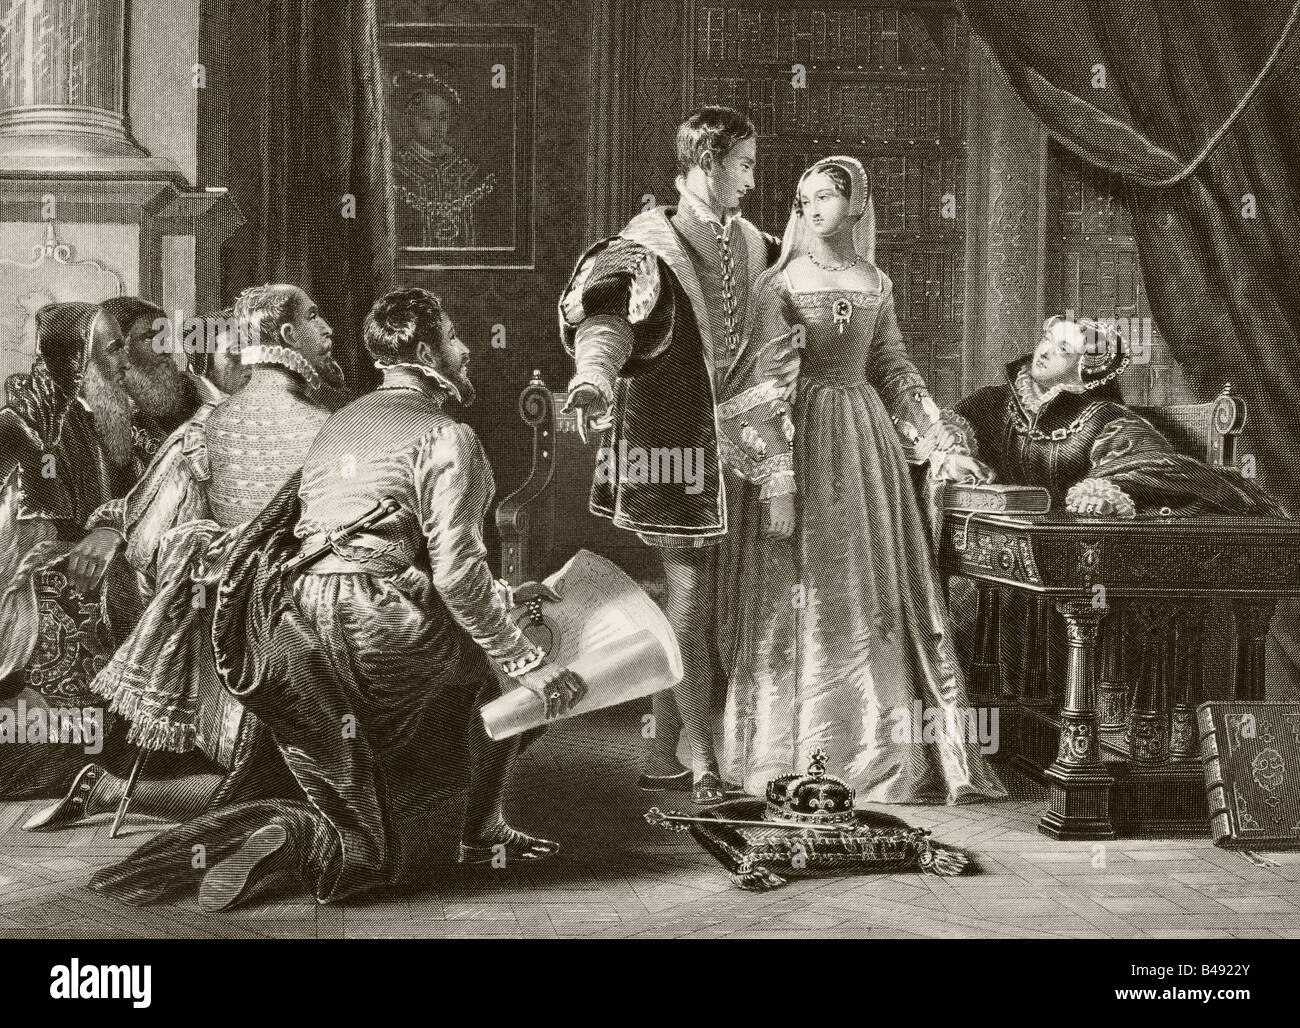 Lady Jane Grey's reluctance to accept the crown, Sion House, July 8th 1553. Lady Jane Grey, aka Lady Jane Dudley, 1537-1554. Stock Photo